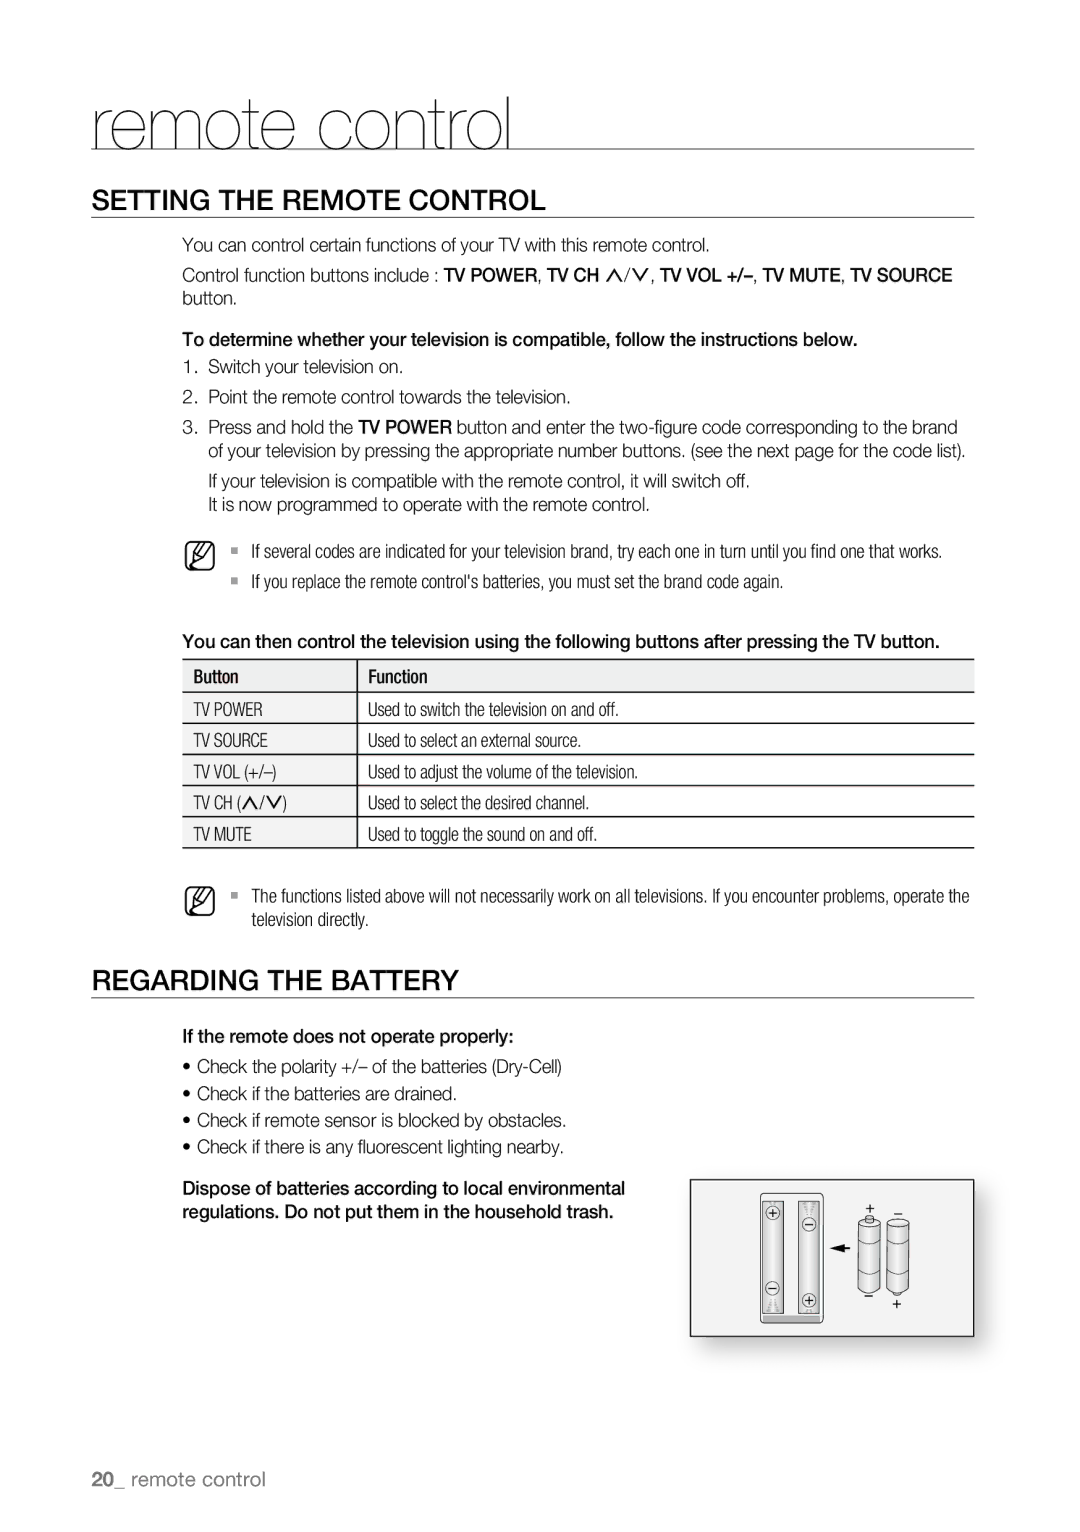 Samsung BD-P4600/XEF, BD-P4600/EDC manual Setting the Remote Control, Regarding the Battery, TV Power, TV Source, TV Mute 